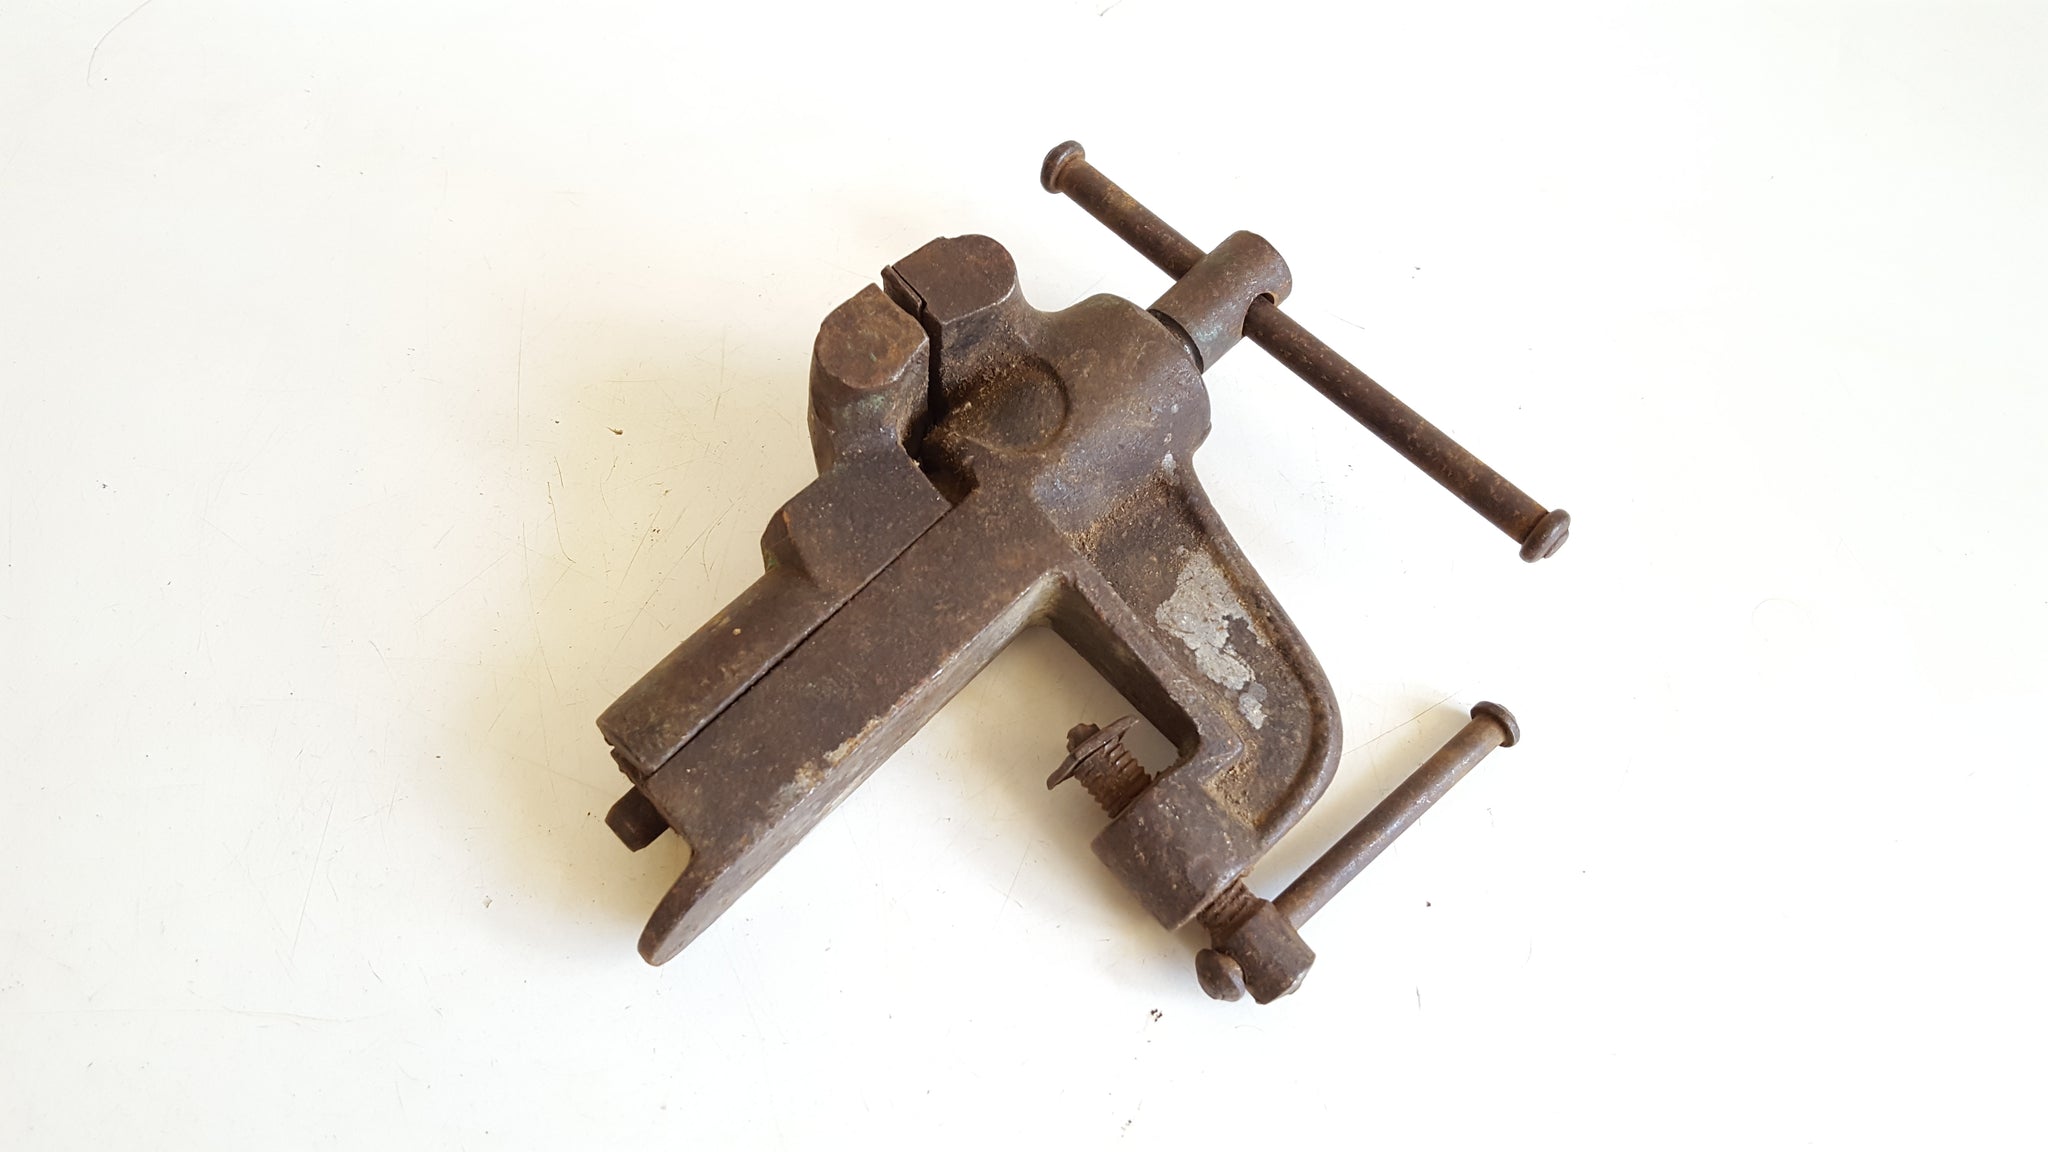 Small Vintage Table Clamp Vice w 2 1/2" Jaws 41023